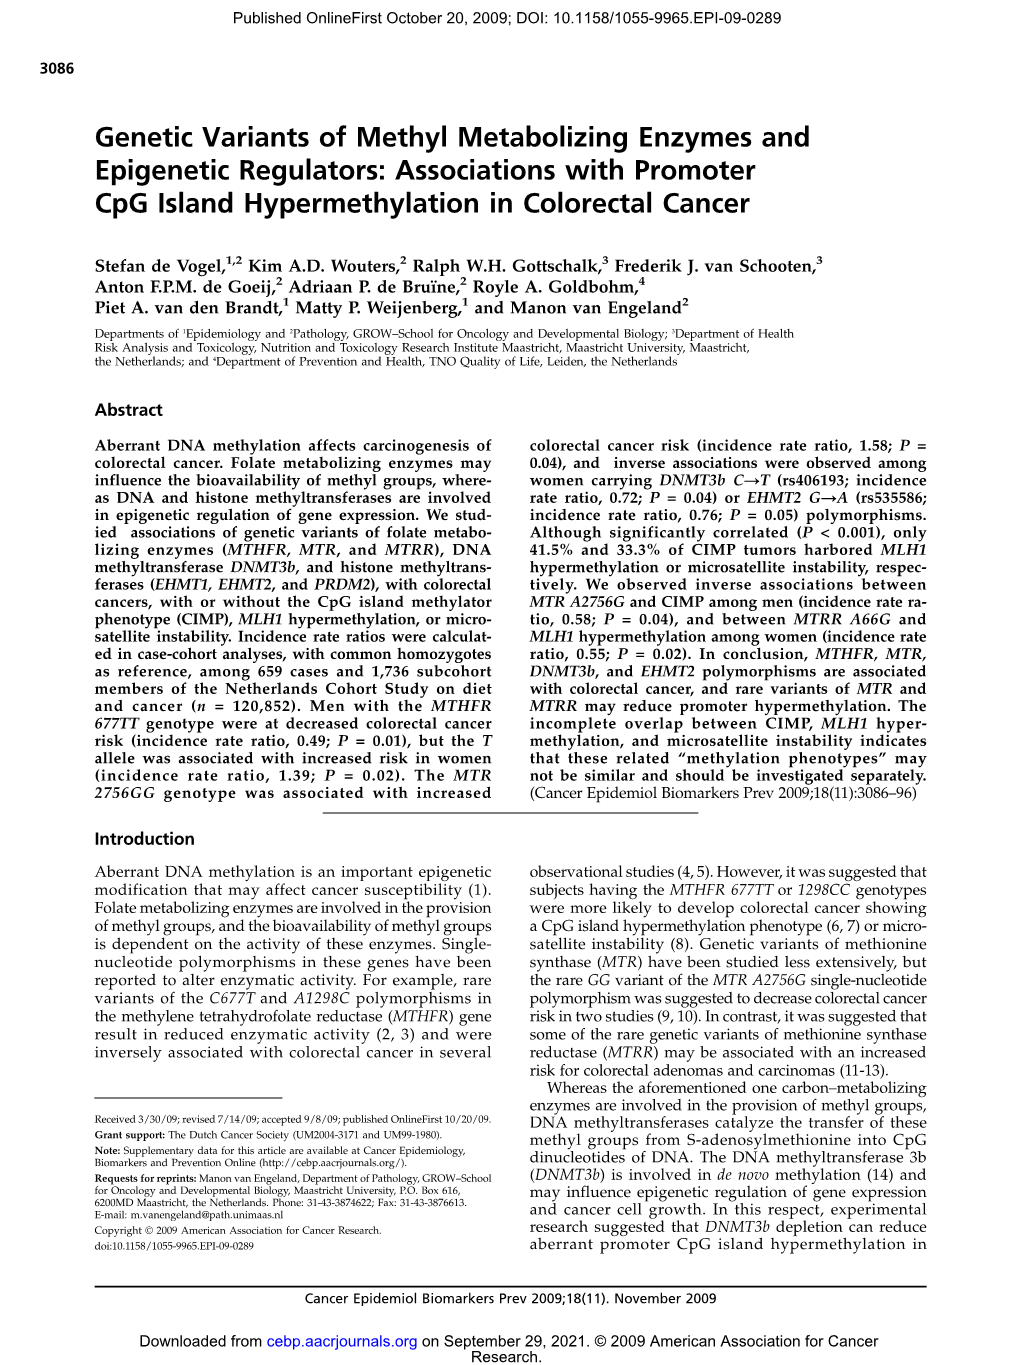 Associations with Promoter Cpg Island Hypermethylation in Colorectal Cancer